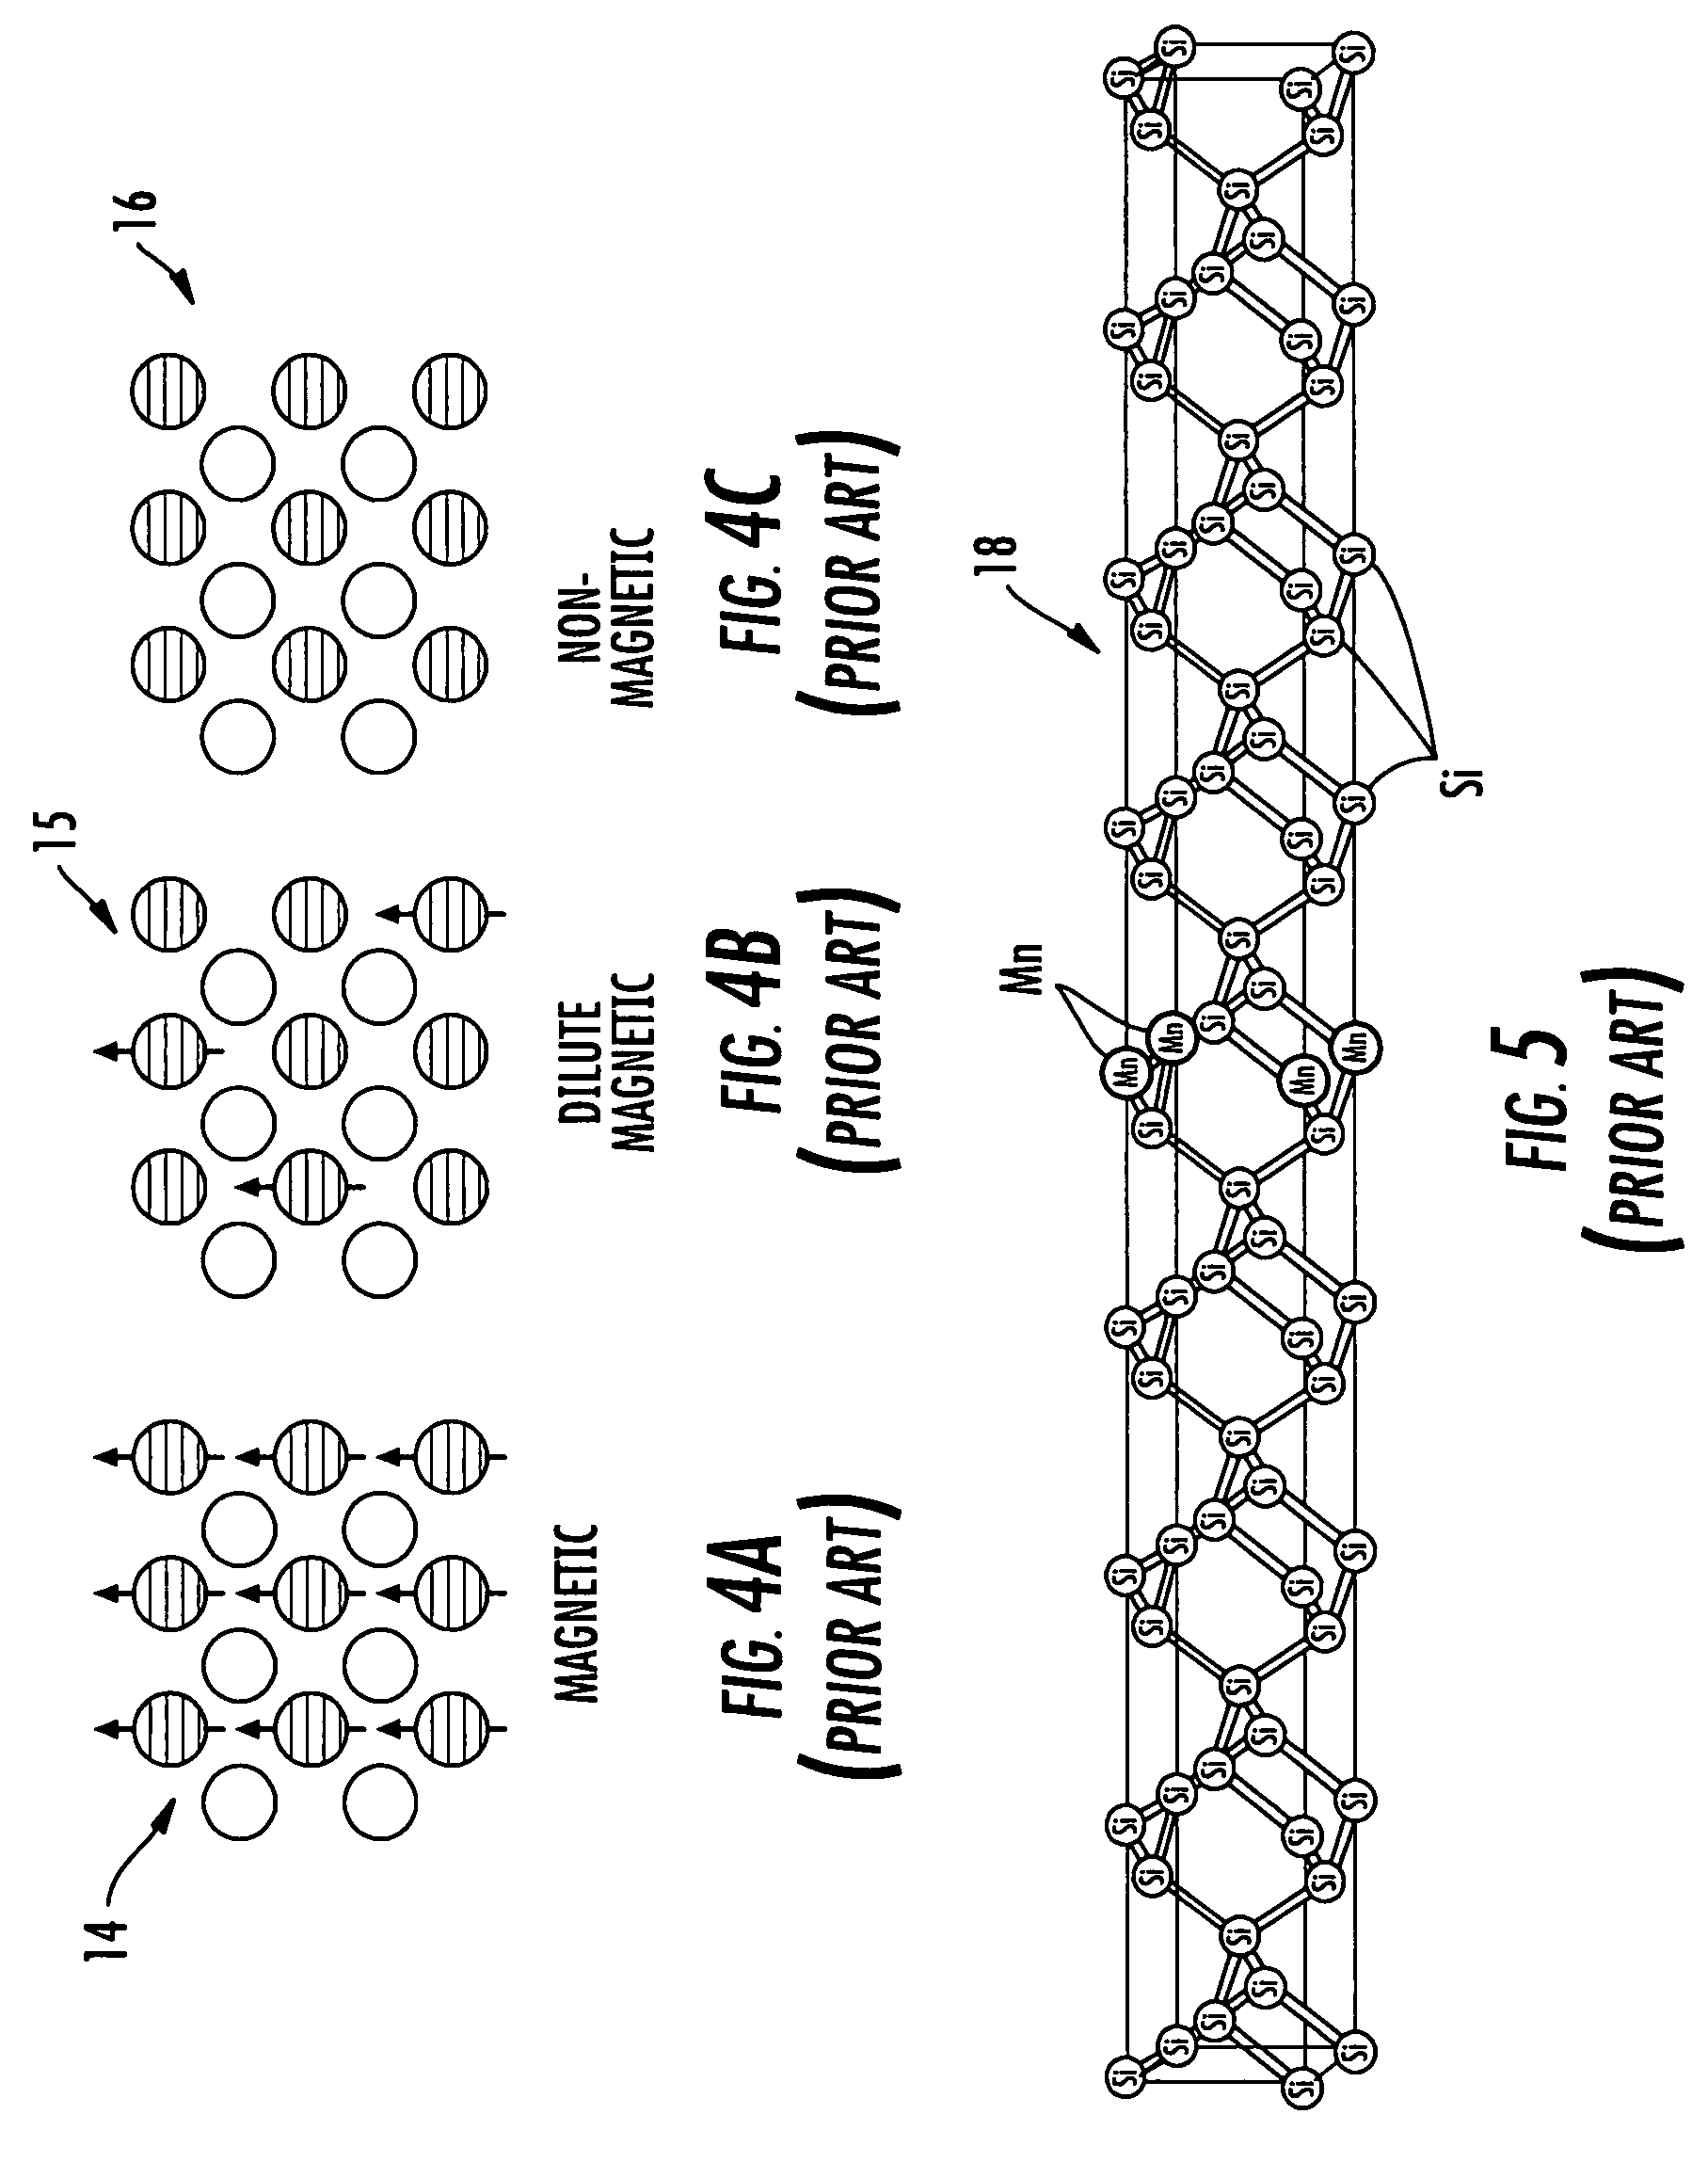 Methods of making spintronic devices with constrained spintronic dopant